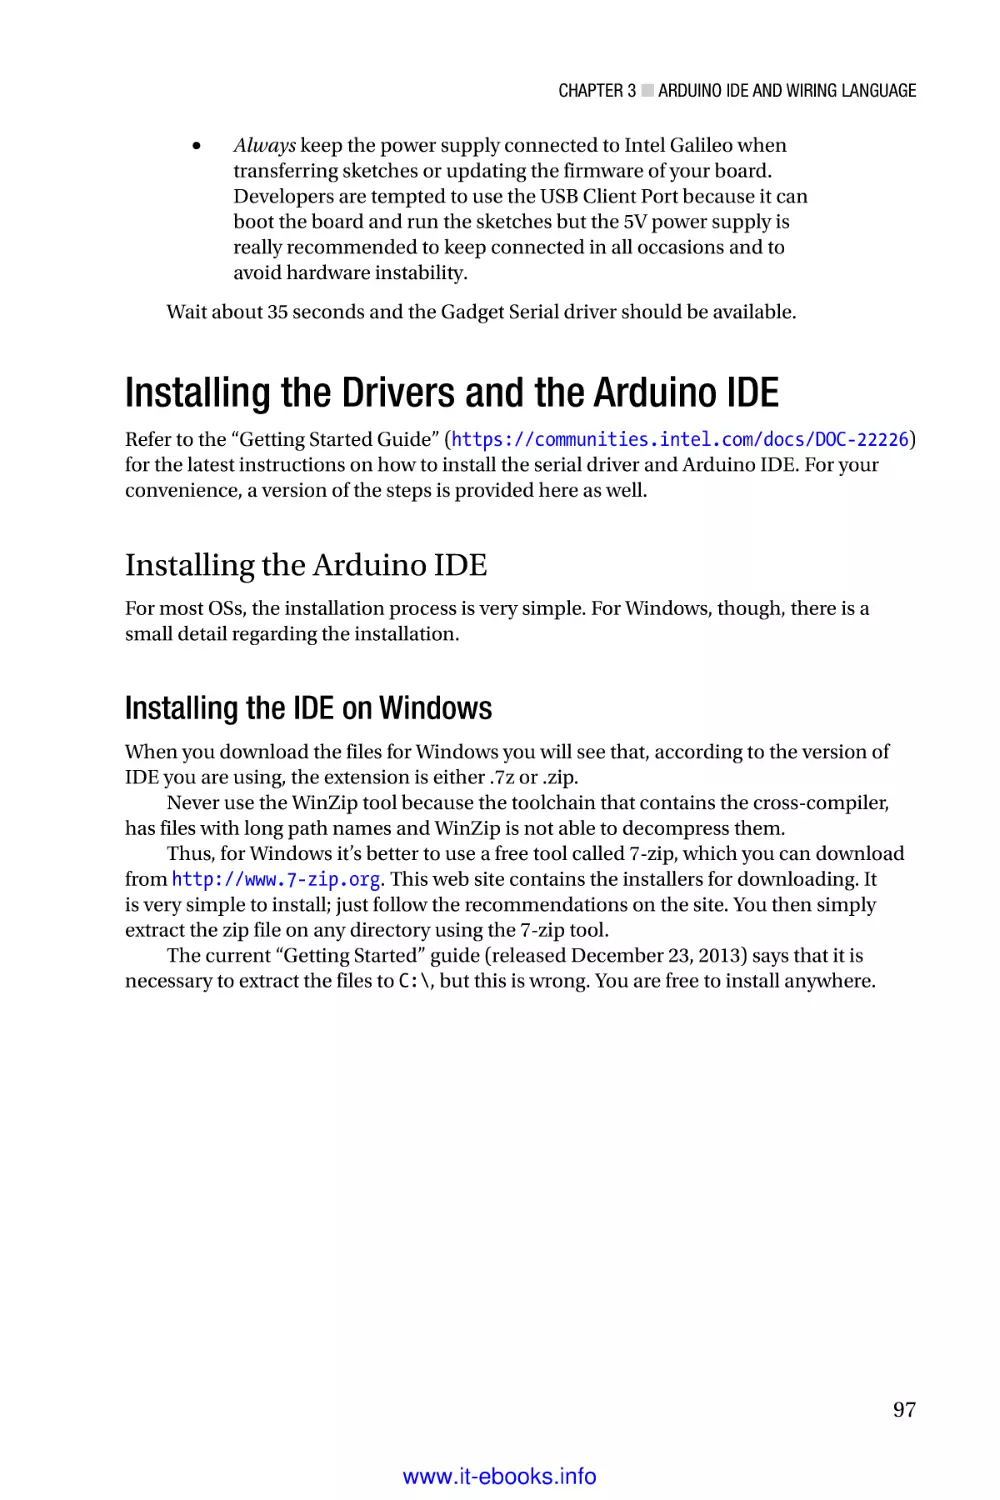 Installing the Drivers and the Arduino IDE
Installing the Arduino IDE
Installing the IDE on Windows